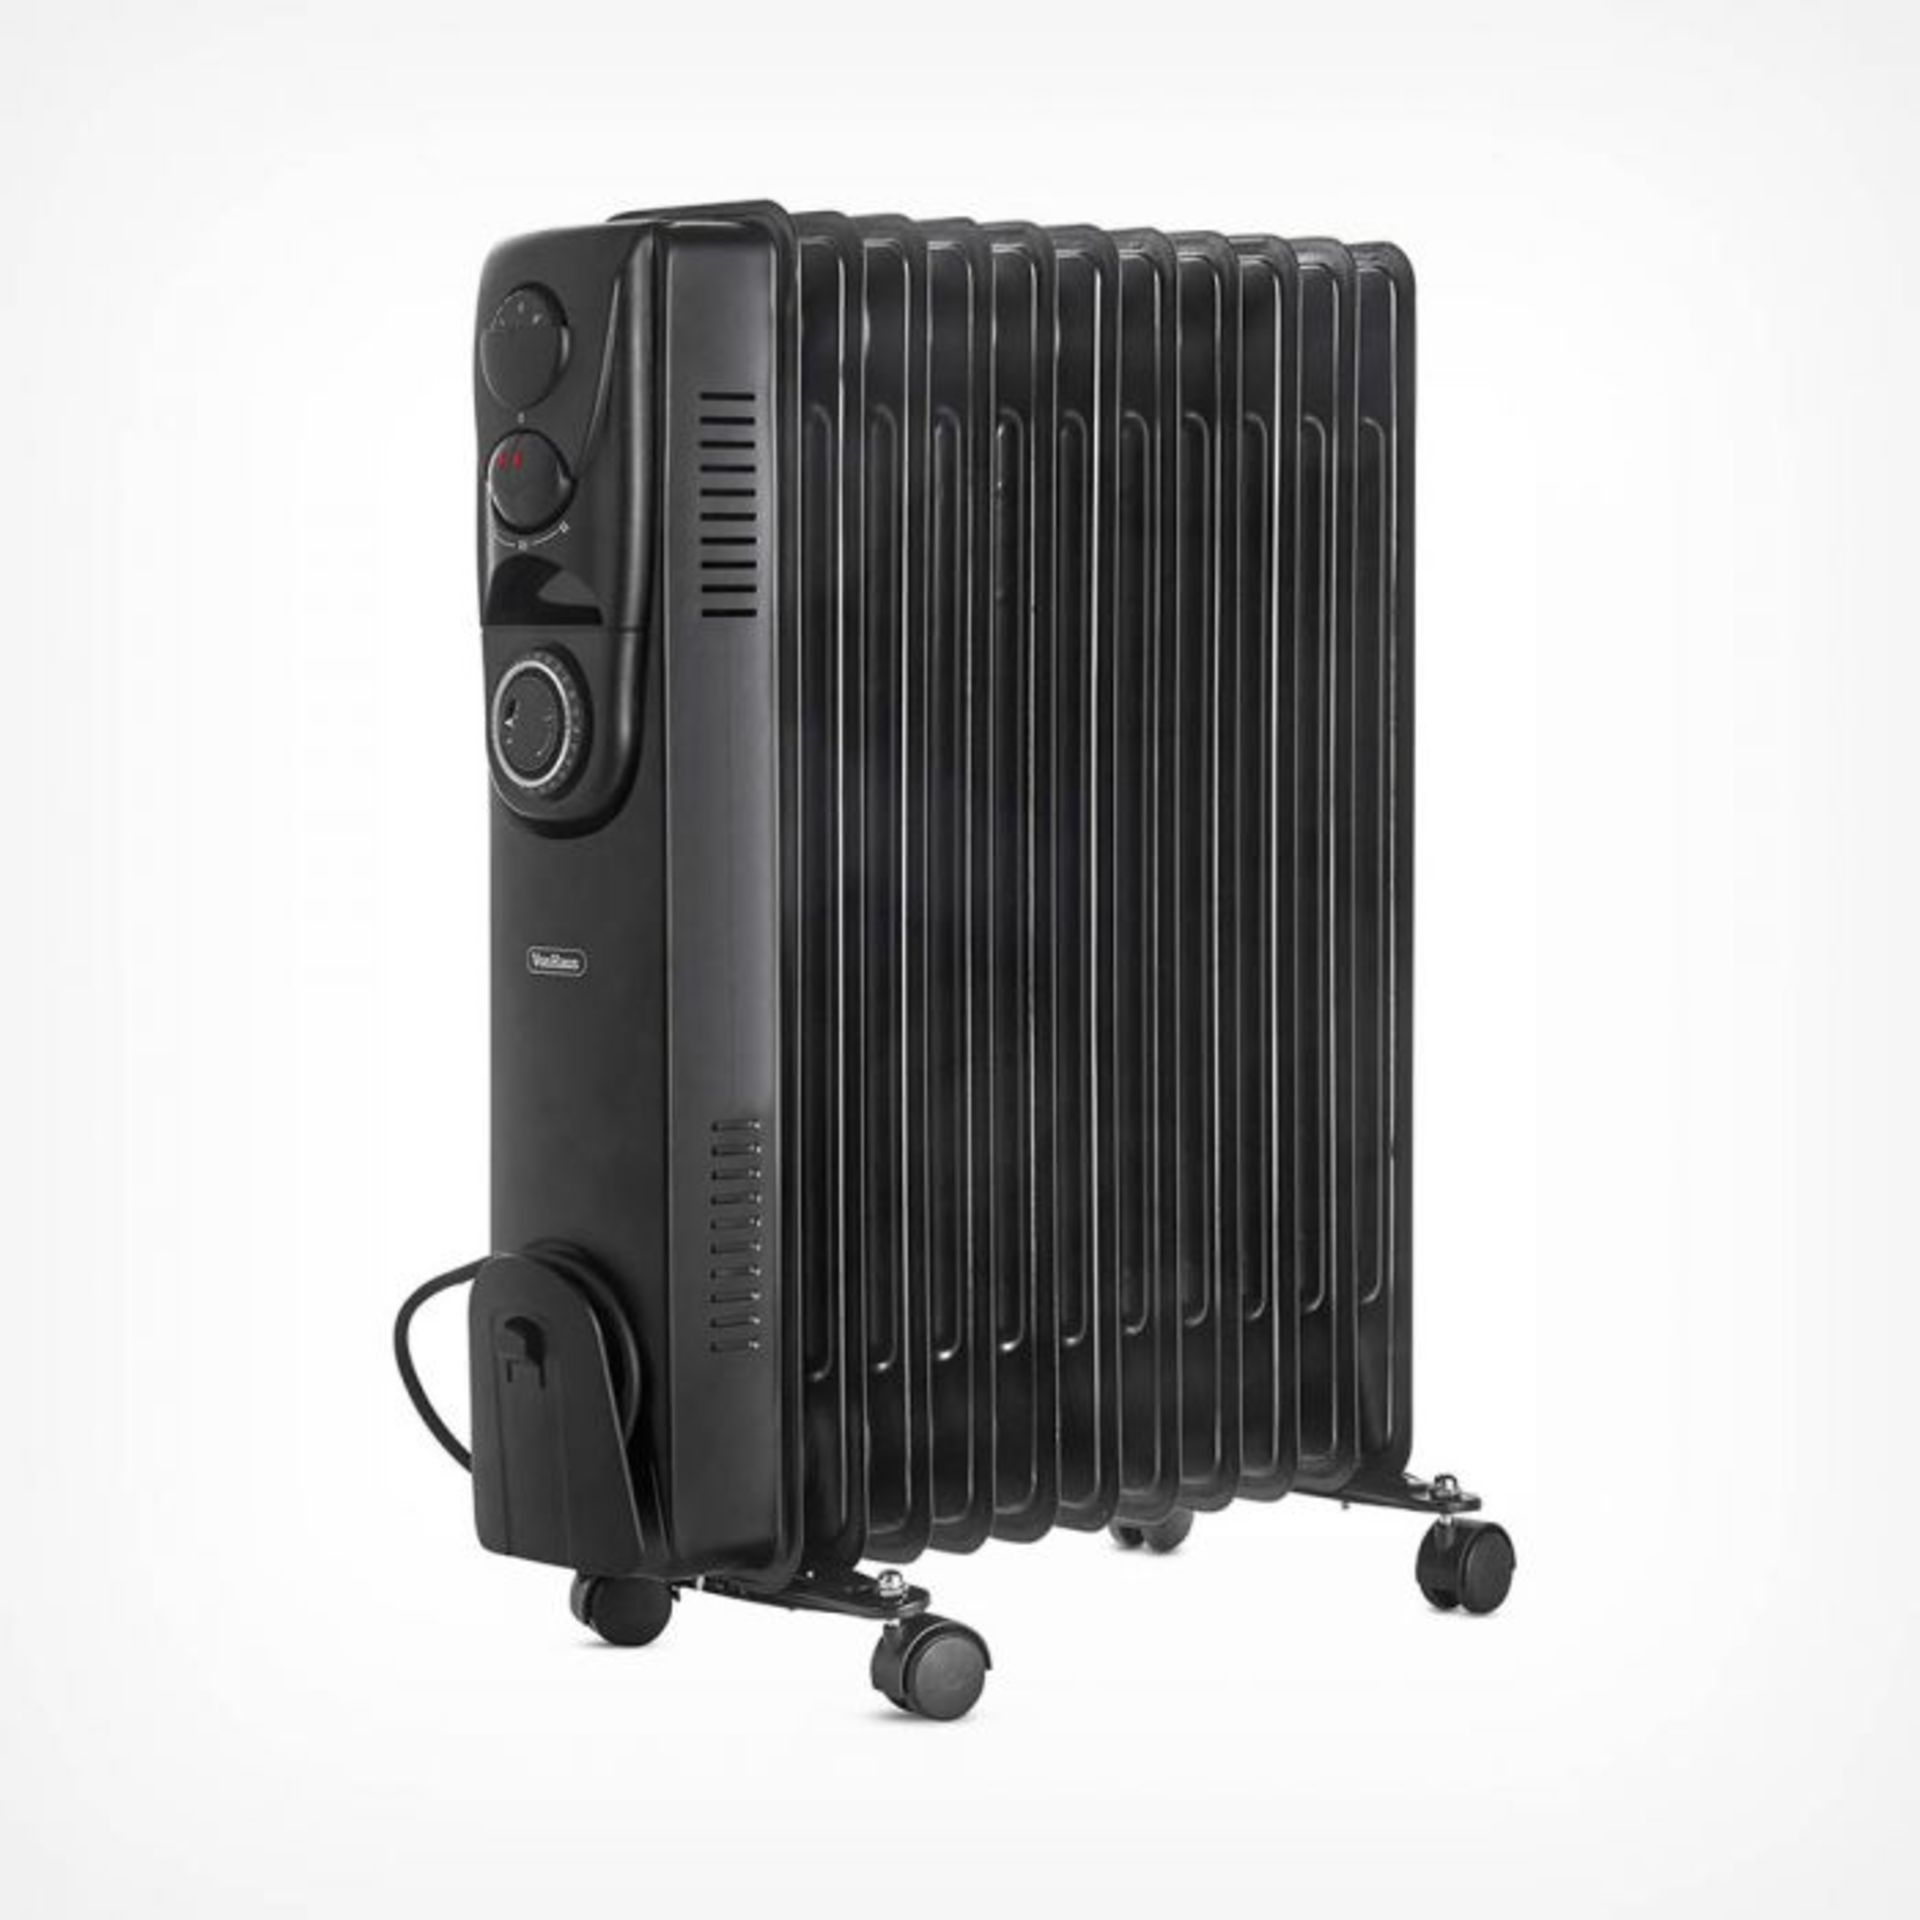 (S357) 11 Fin 2500W Oil Filled Radiator - Black 2500W radiator with 11 oil-filled fins for hea... - Image 2 of 3